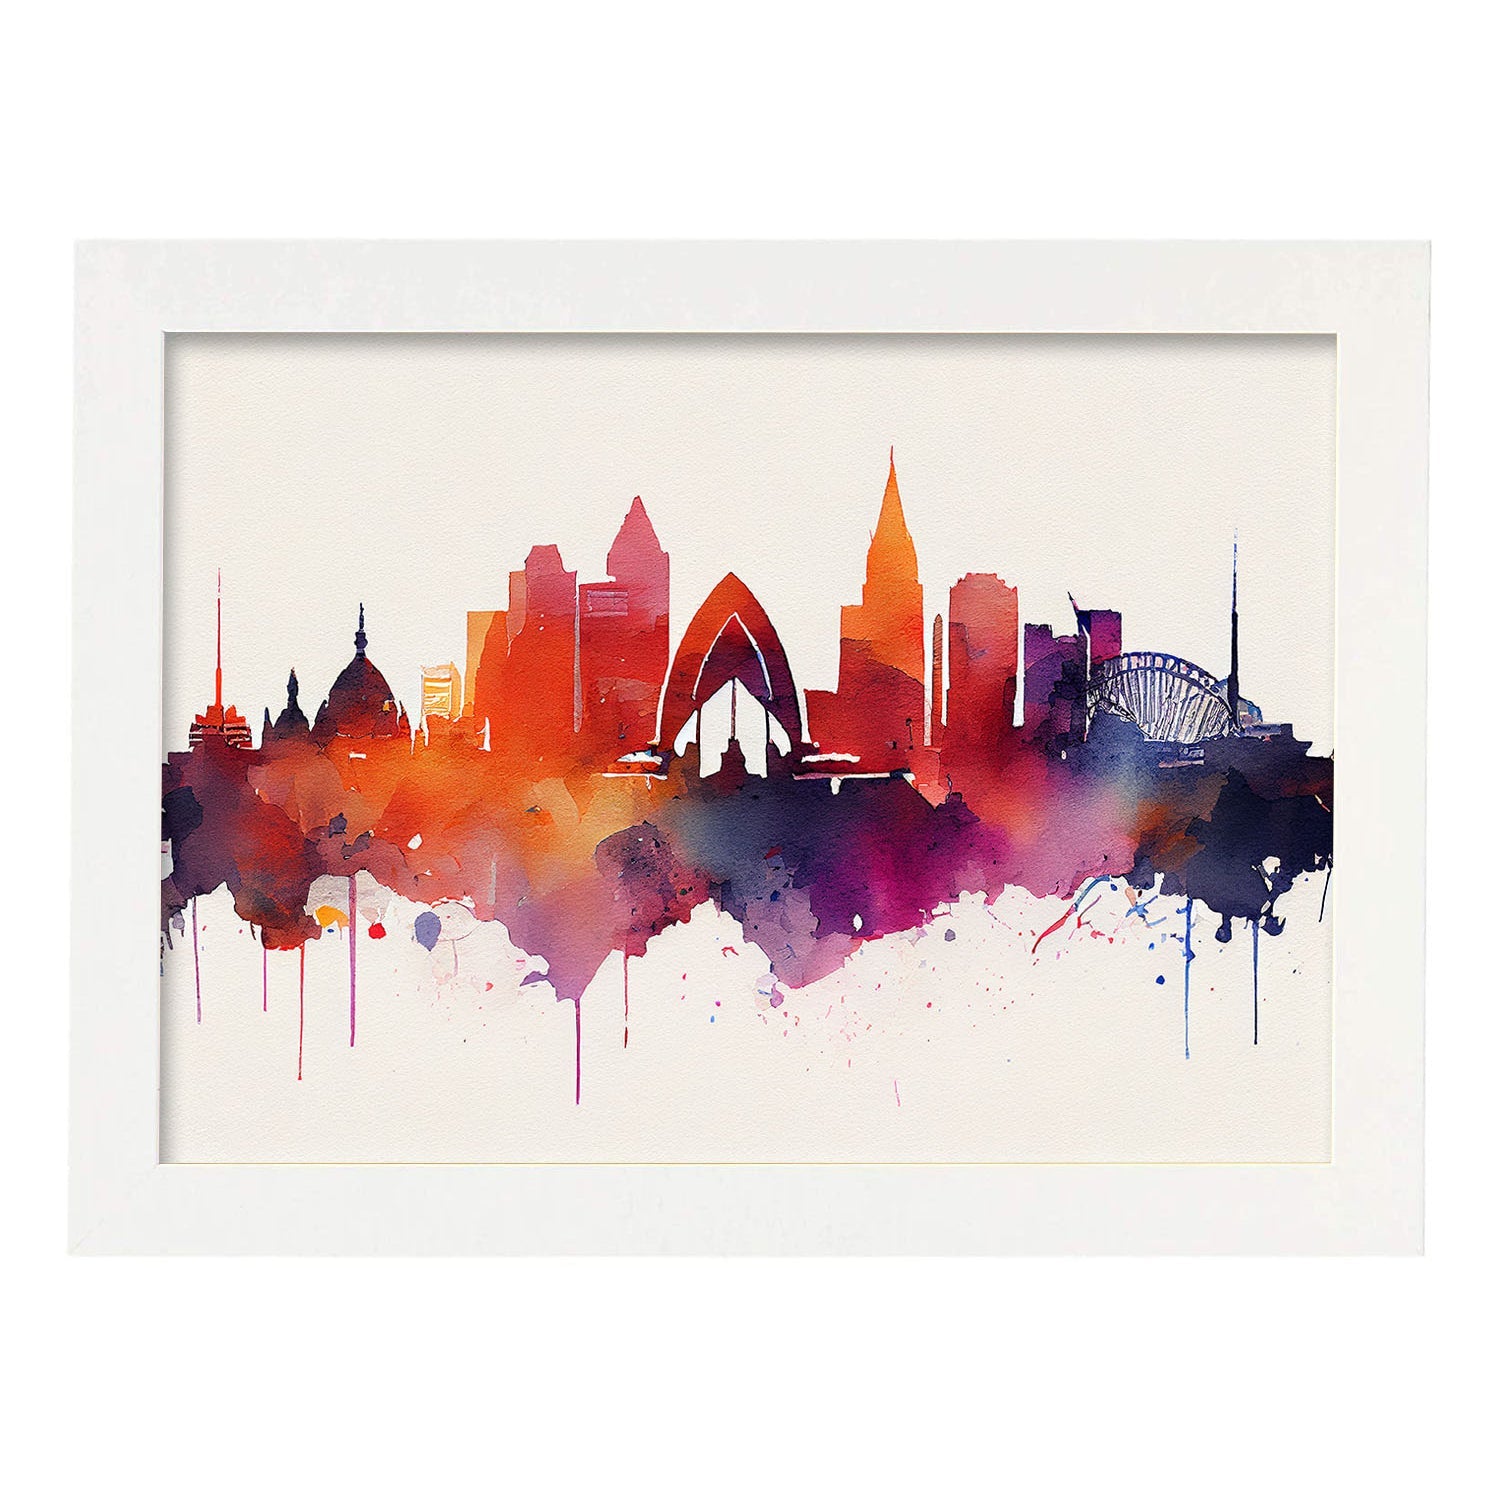 Nacnic watercolor of a skyline of the city of Sydney_2. Aesthetic Wall Art Prints for Bedroom or Living Room Design.-Artwork-Nacnic-A4-Marco Blanco-Nacnic Estudio SL